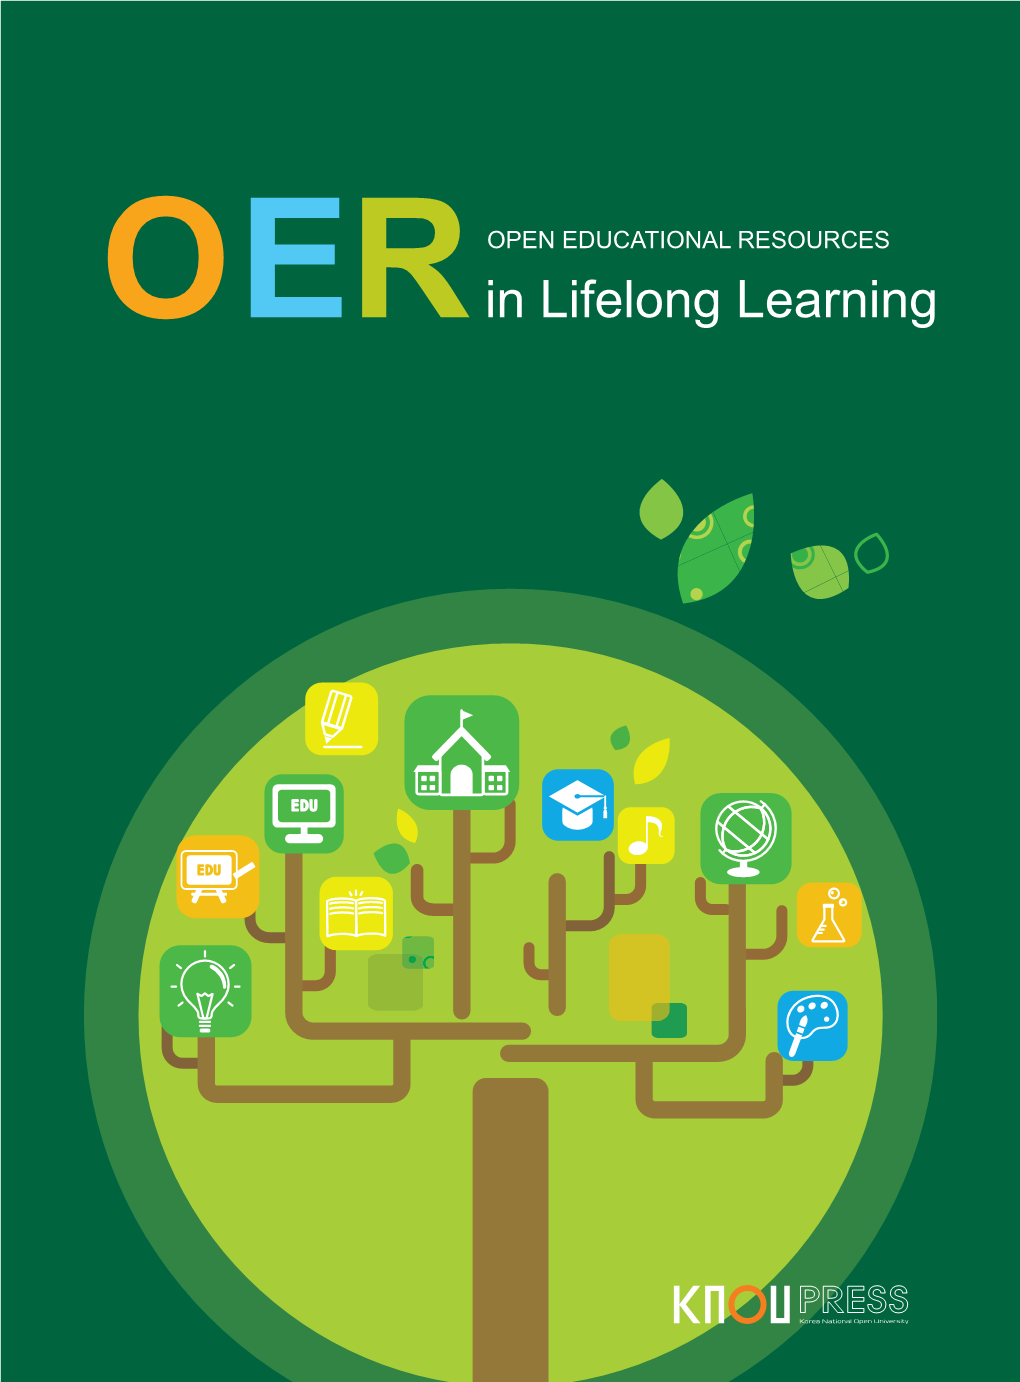 Open Educational Resources in Lifelong Learning